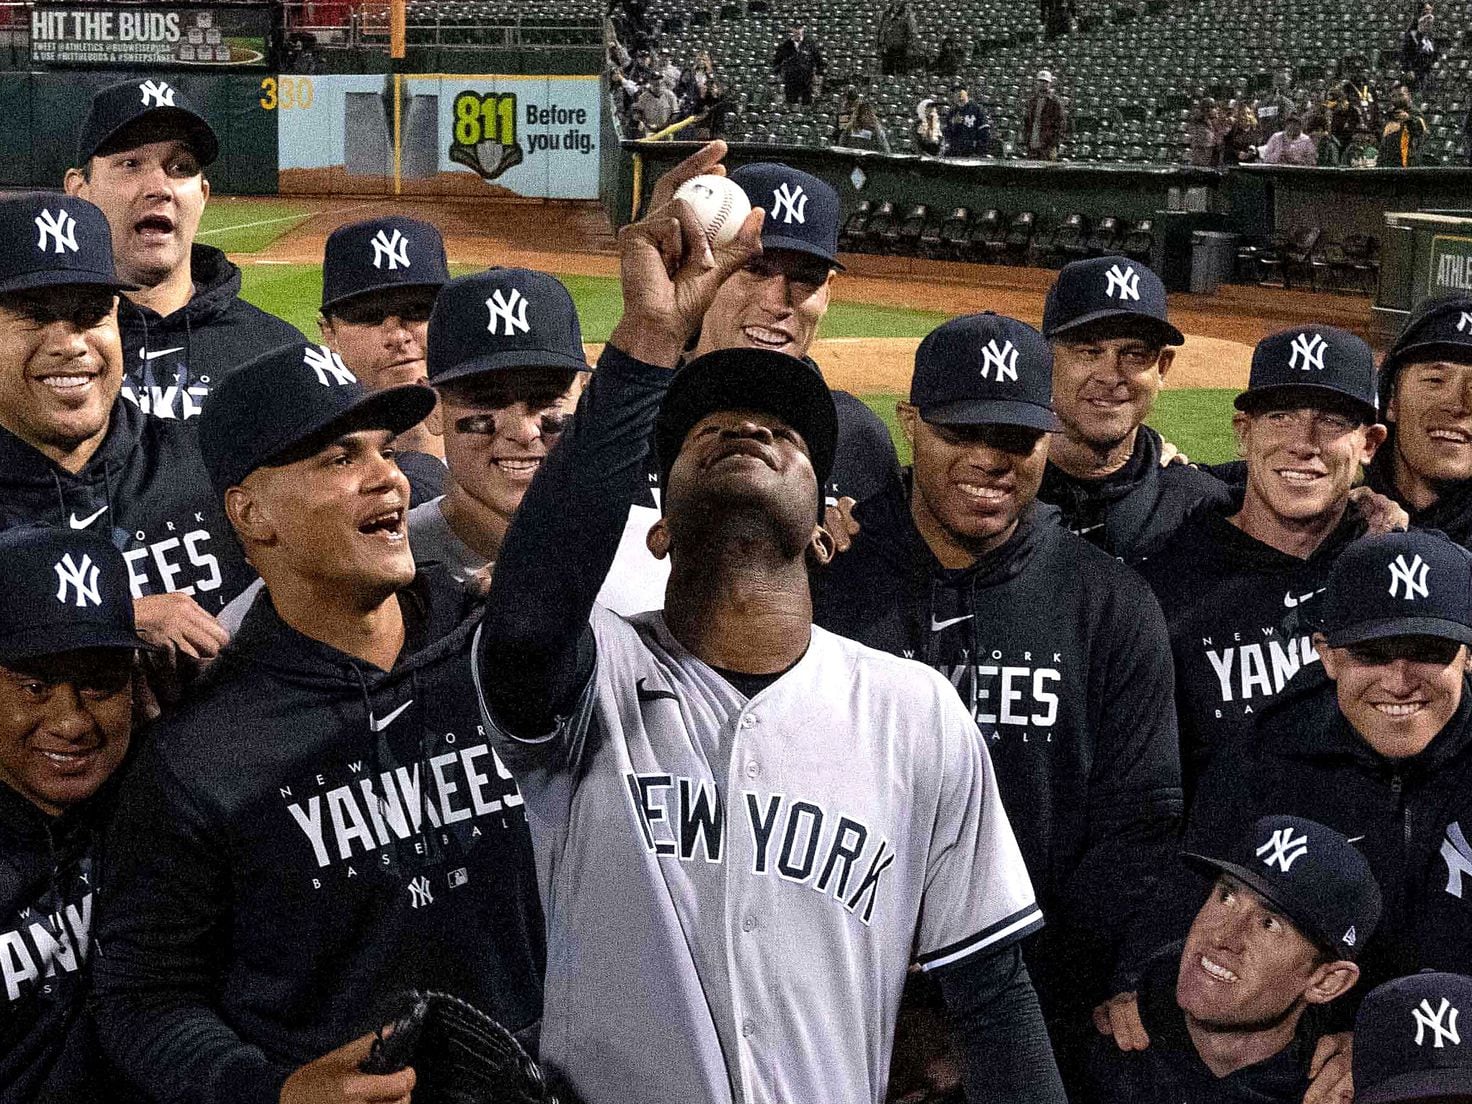 MLB - Last night's perfect game was the 4th in franchise history for the  Yankees - the most in AL/NL history.